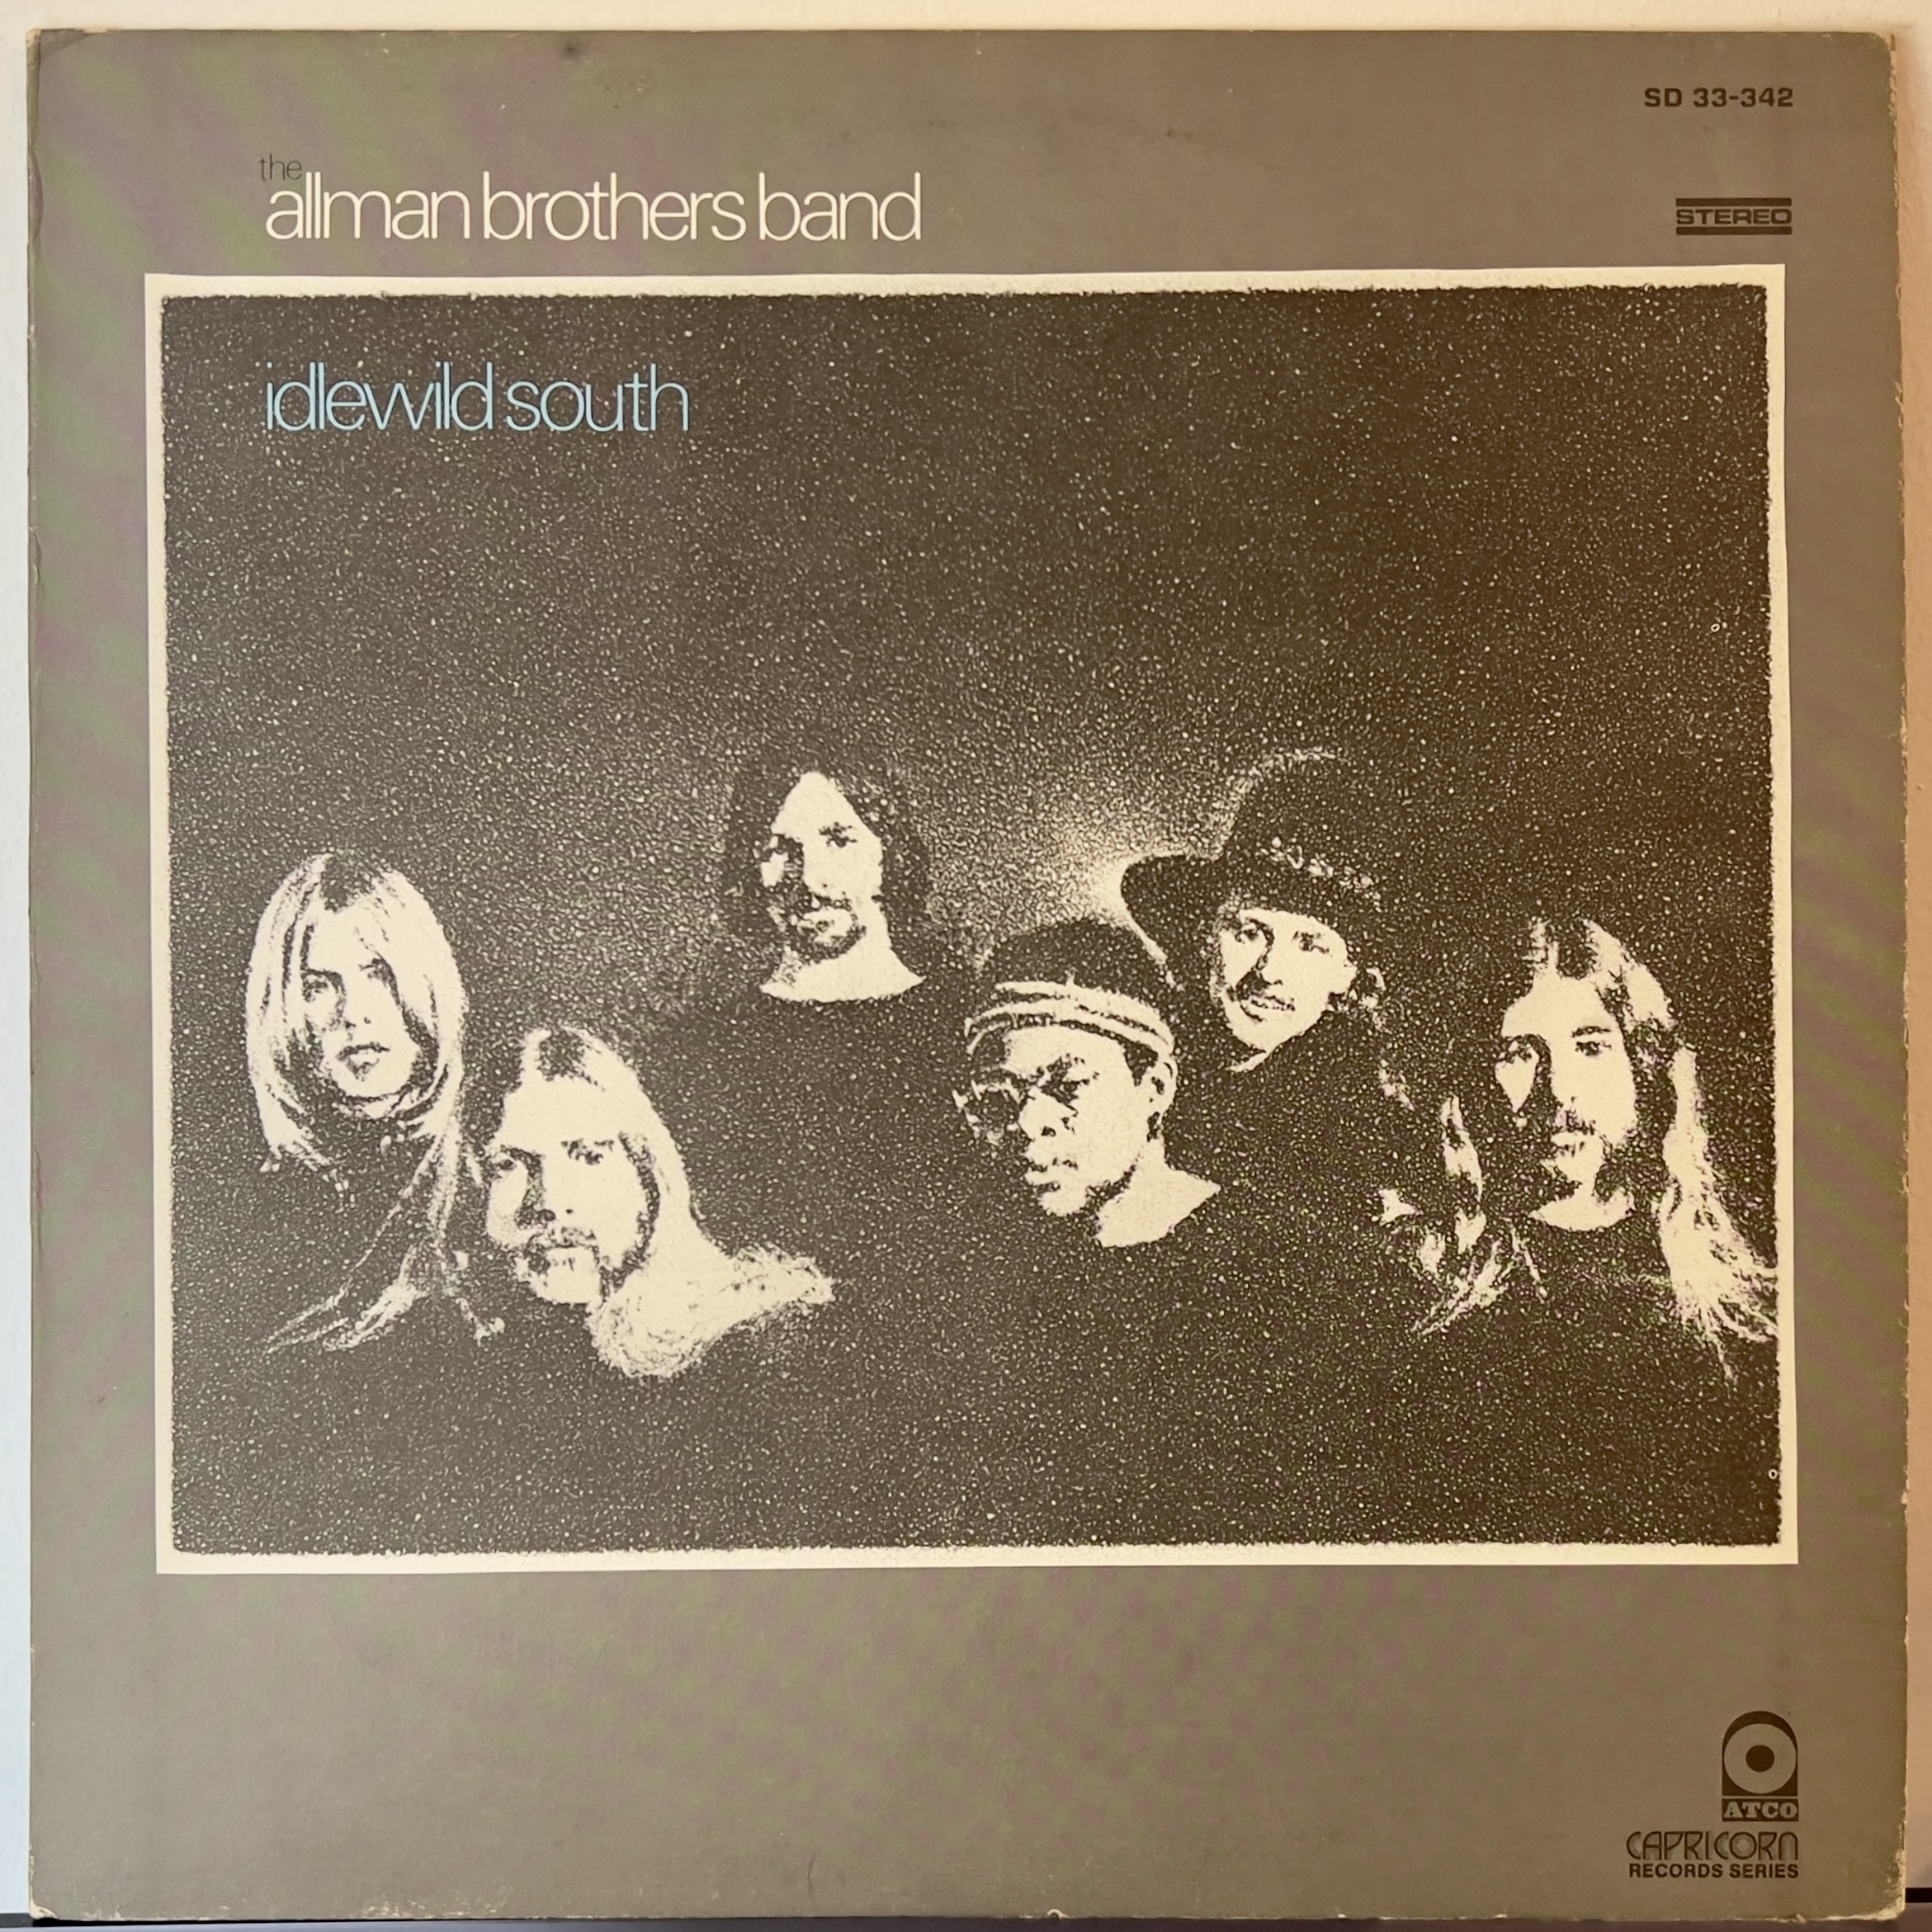 Idlewild South by the Allman Brothers Band